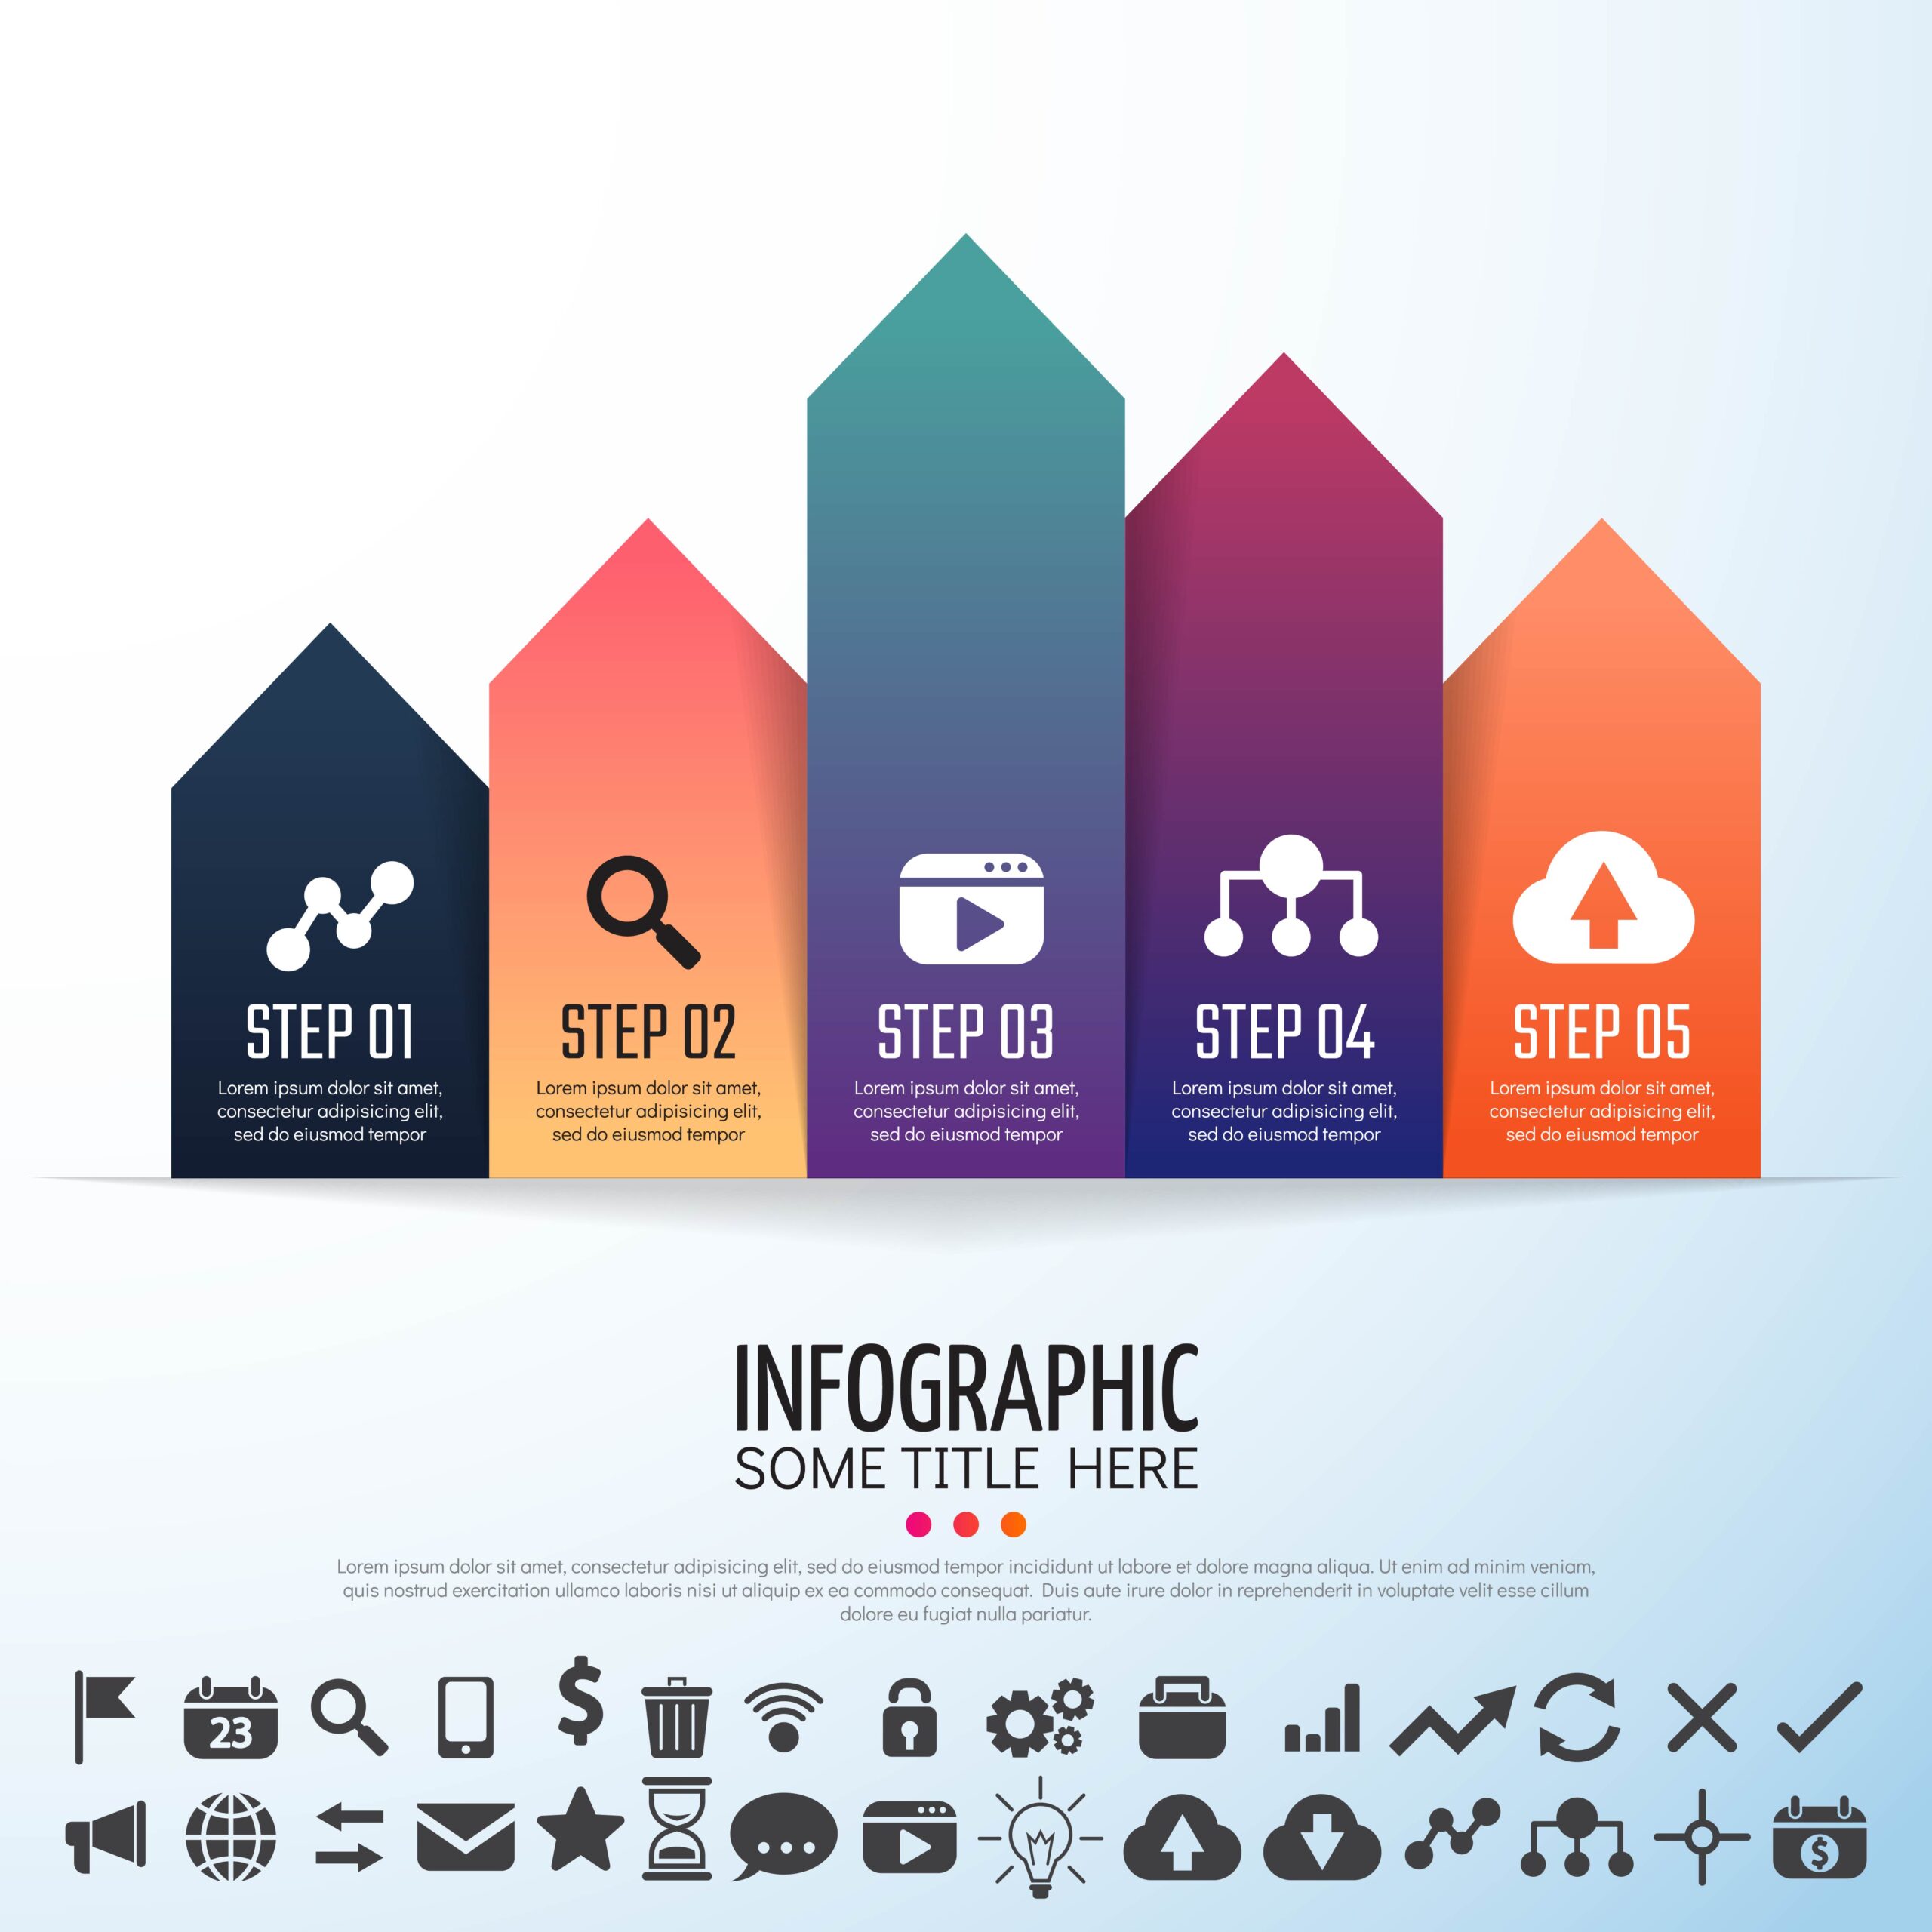 8 Step Arrow Circle Infographics Template Stock Illustration - Download Image Now - iStock